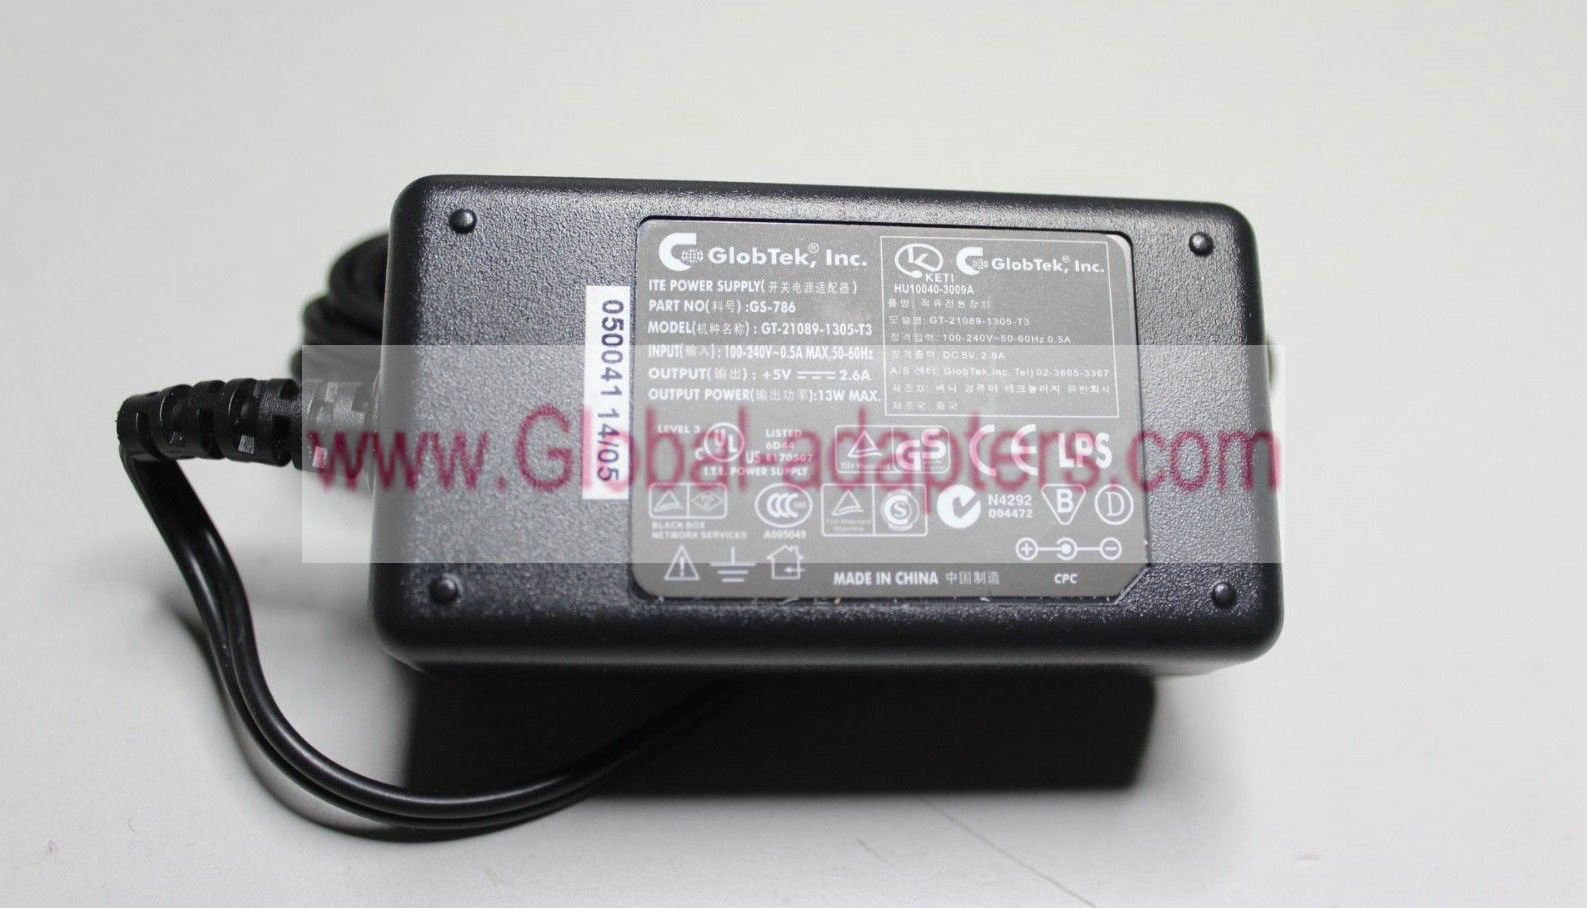 New GLOBTEK GT-21089-1305-T3 AC ADAPTER 5V DC 2.6A GS786 POWER SUPPLY - Click Image to Close